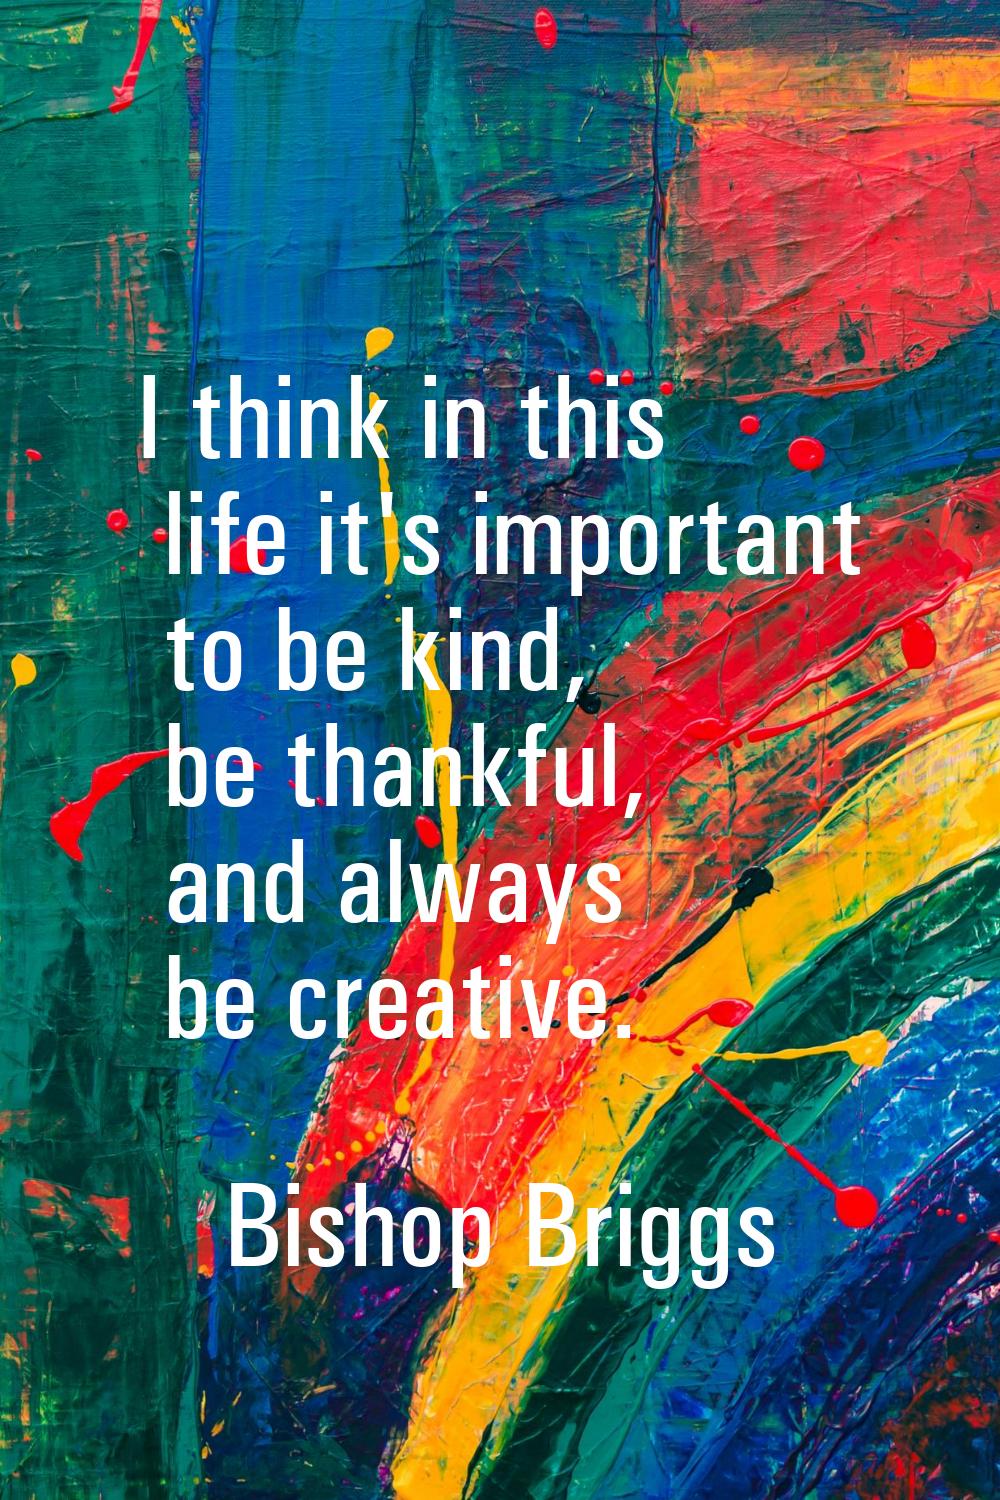 I think in this life it's important to be kind, be thankful, and always be creative.